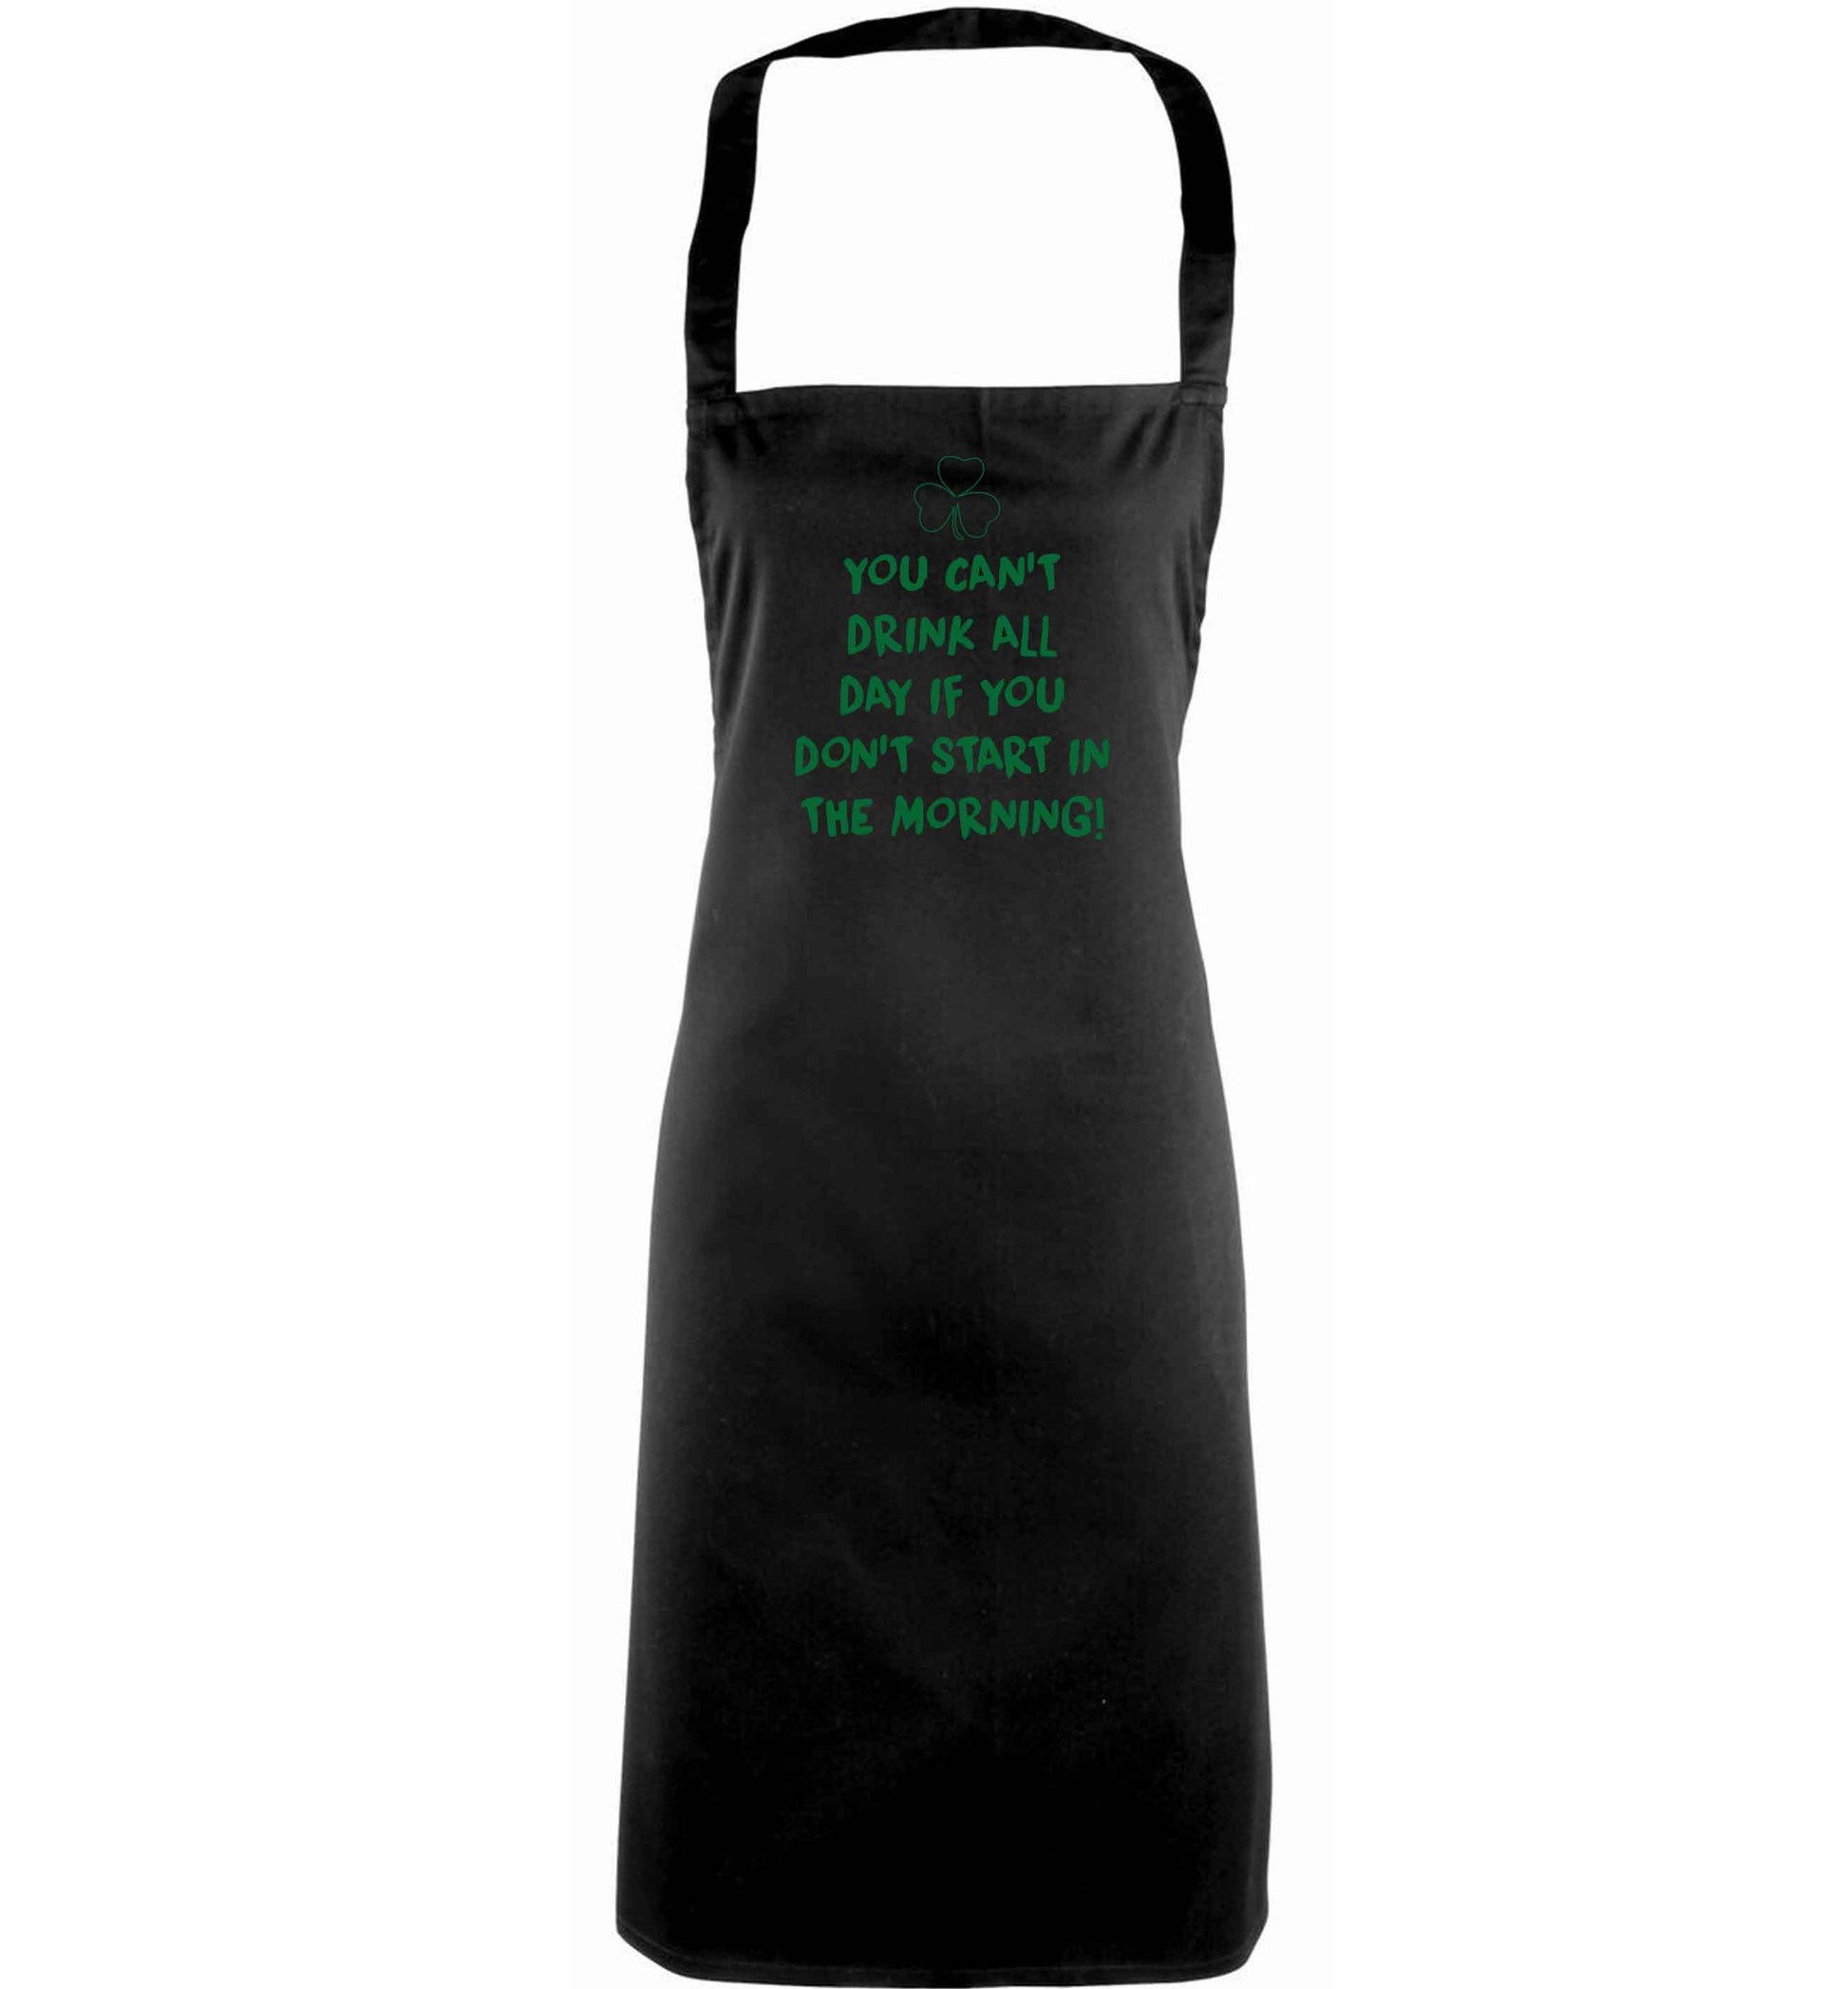 You can't drink all day if you don't start in the morning adults black apron